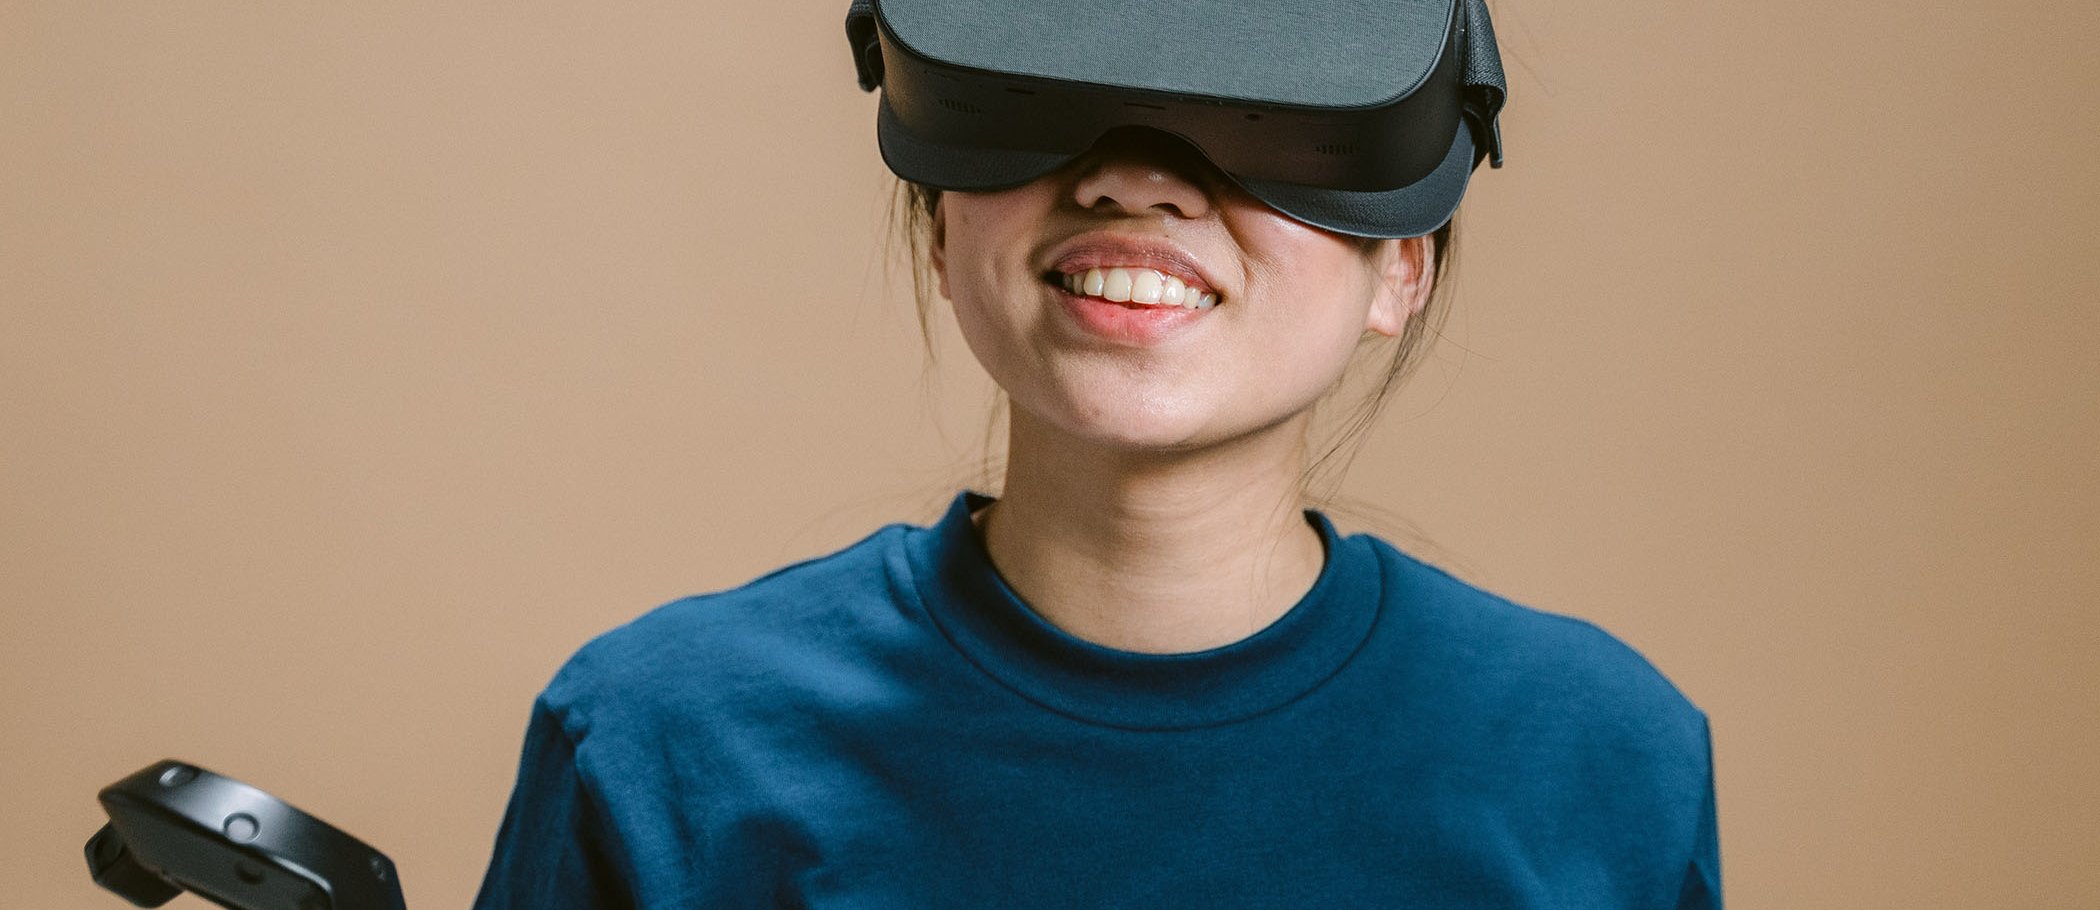 A person wearing virtual reality goggles